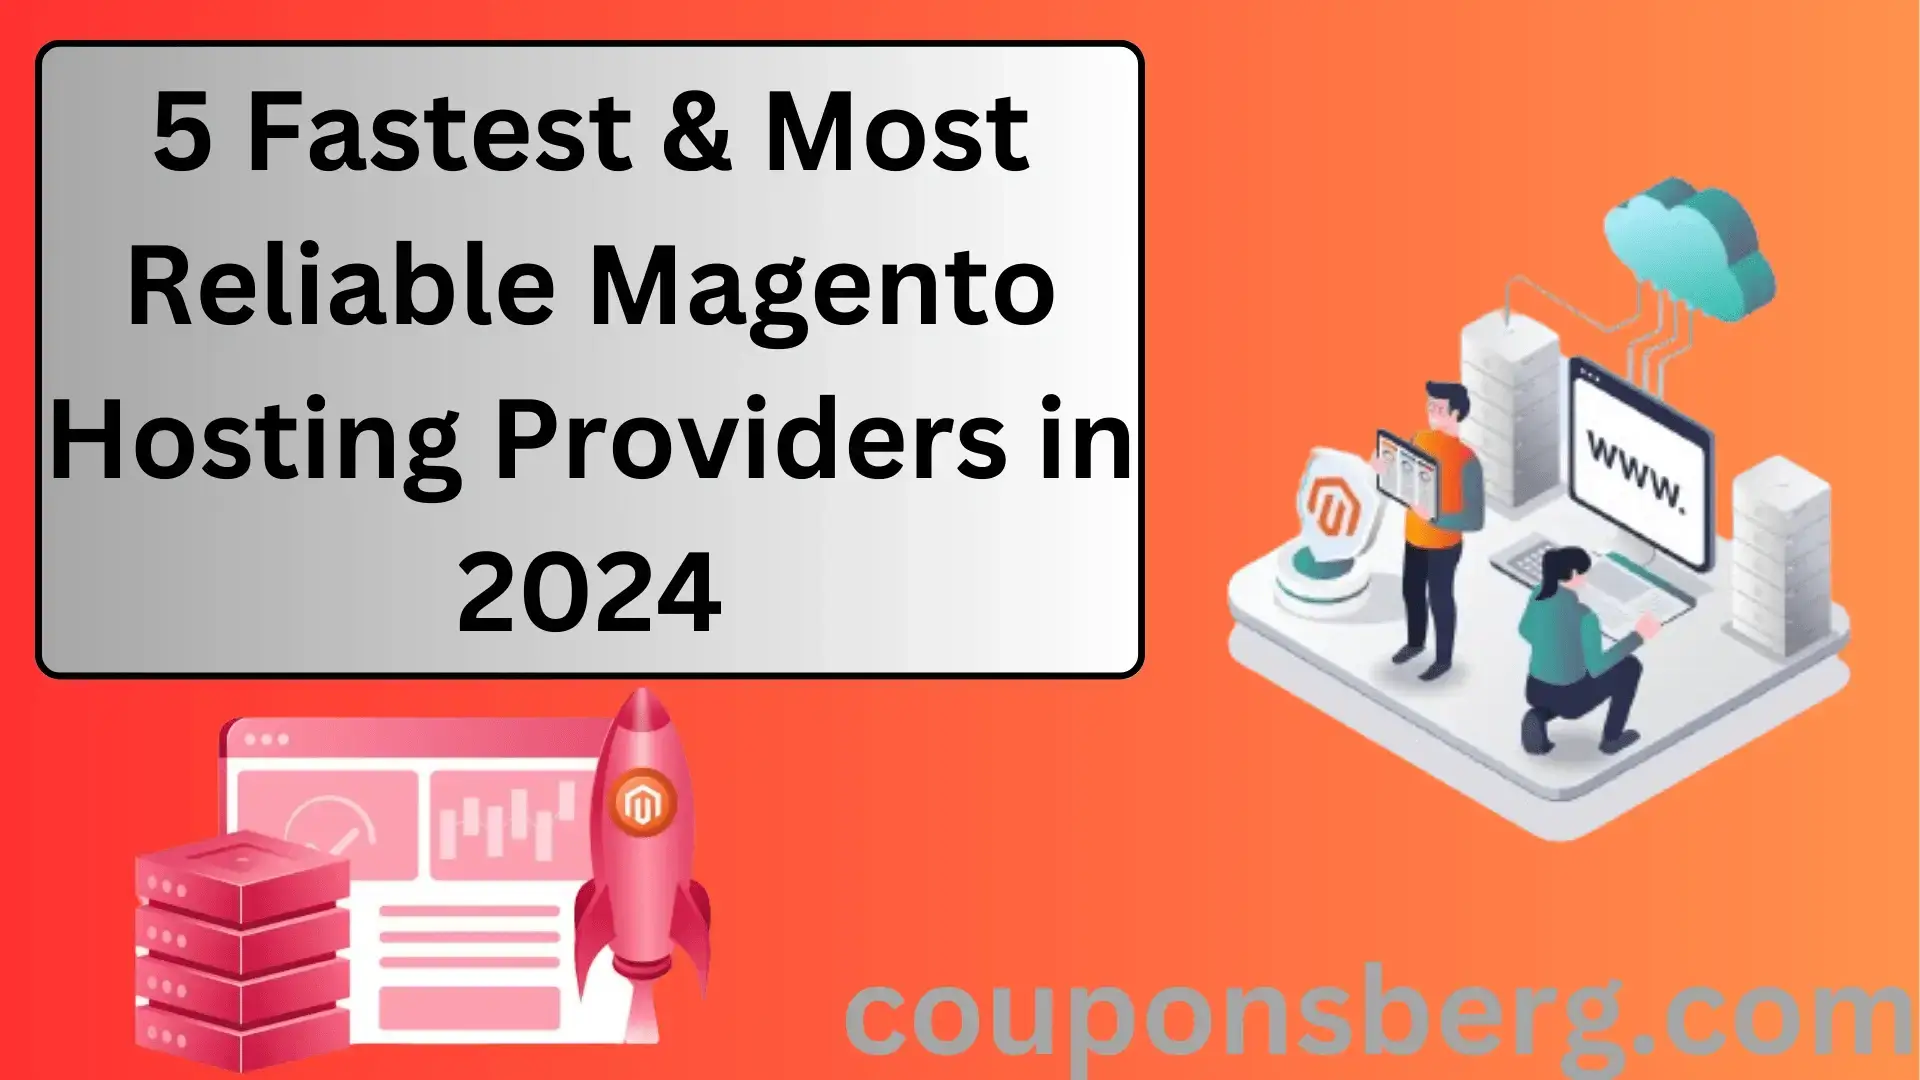 5 Fastest & Most Reliable Magento Hosting Providers in 2024